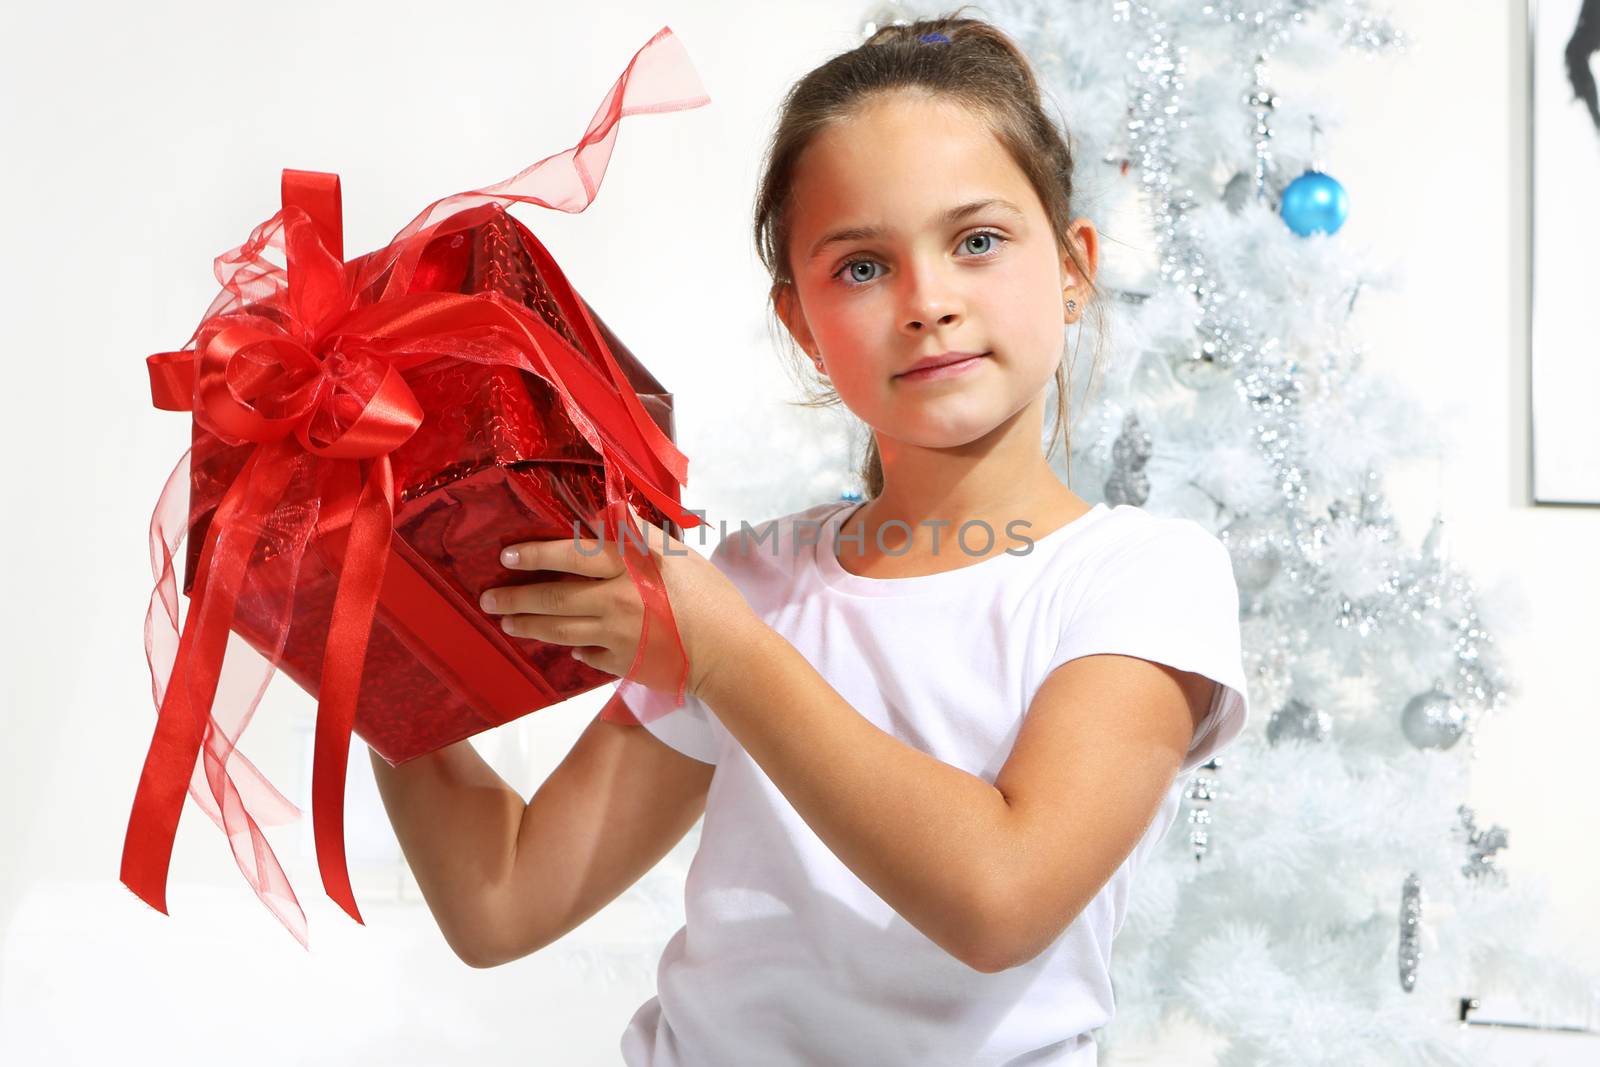 Girl with Christmas present by robert_przybysz